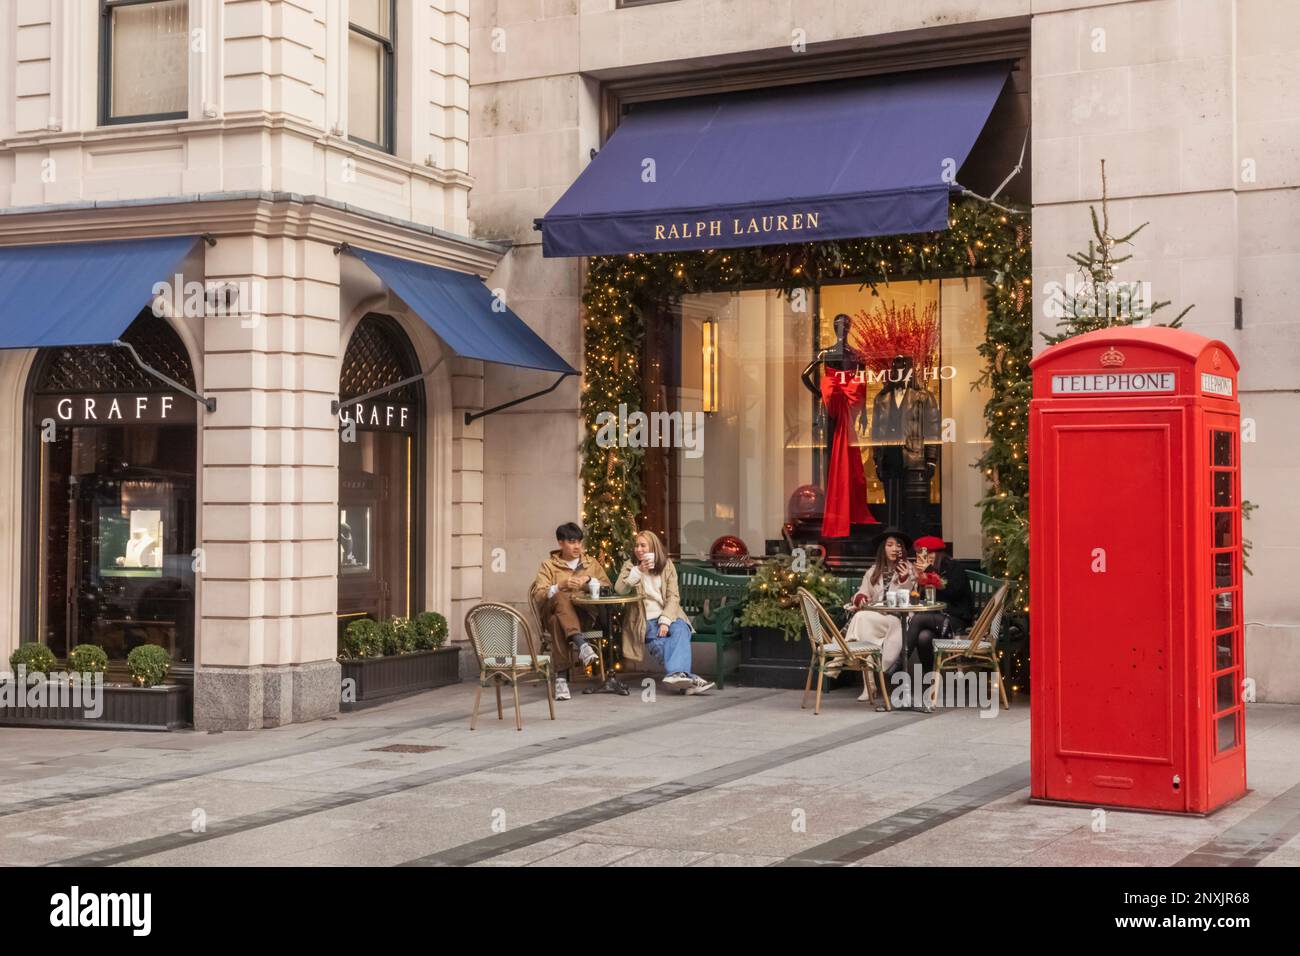 England, London, Piccadilly, New Bond Street, Exterior View of Ralph Lauren Store with Christmas Decorations and Traditional Red Telephone Box Stock Photo